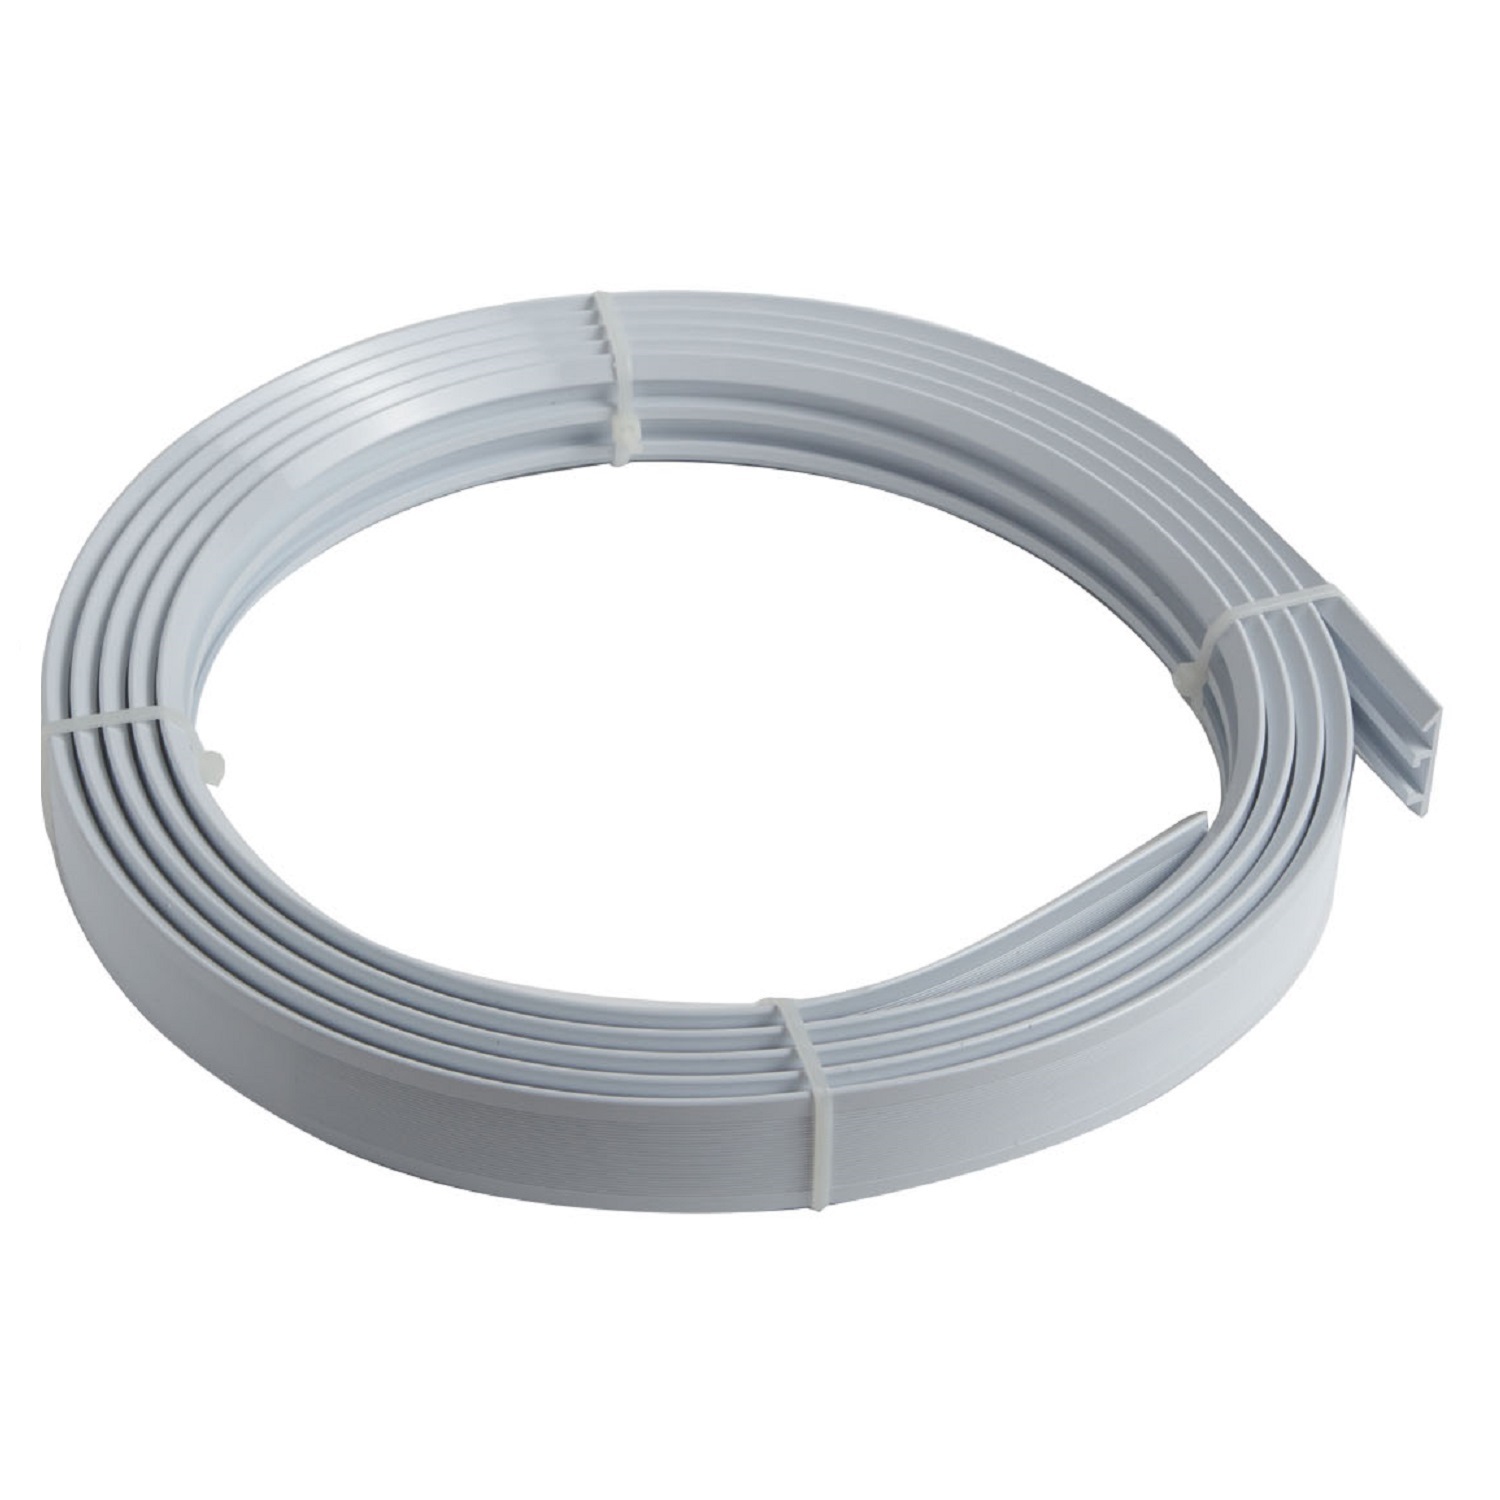 Simply Coiled PVC Track  - White Image